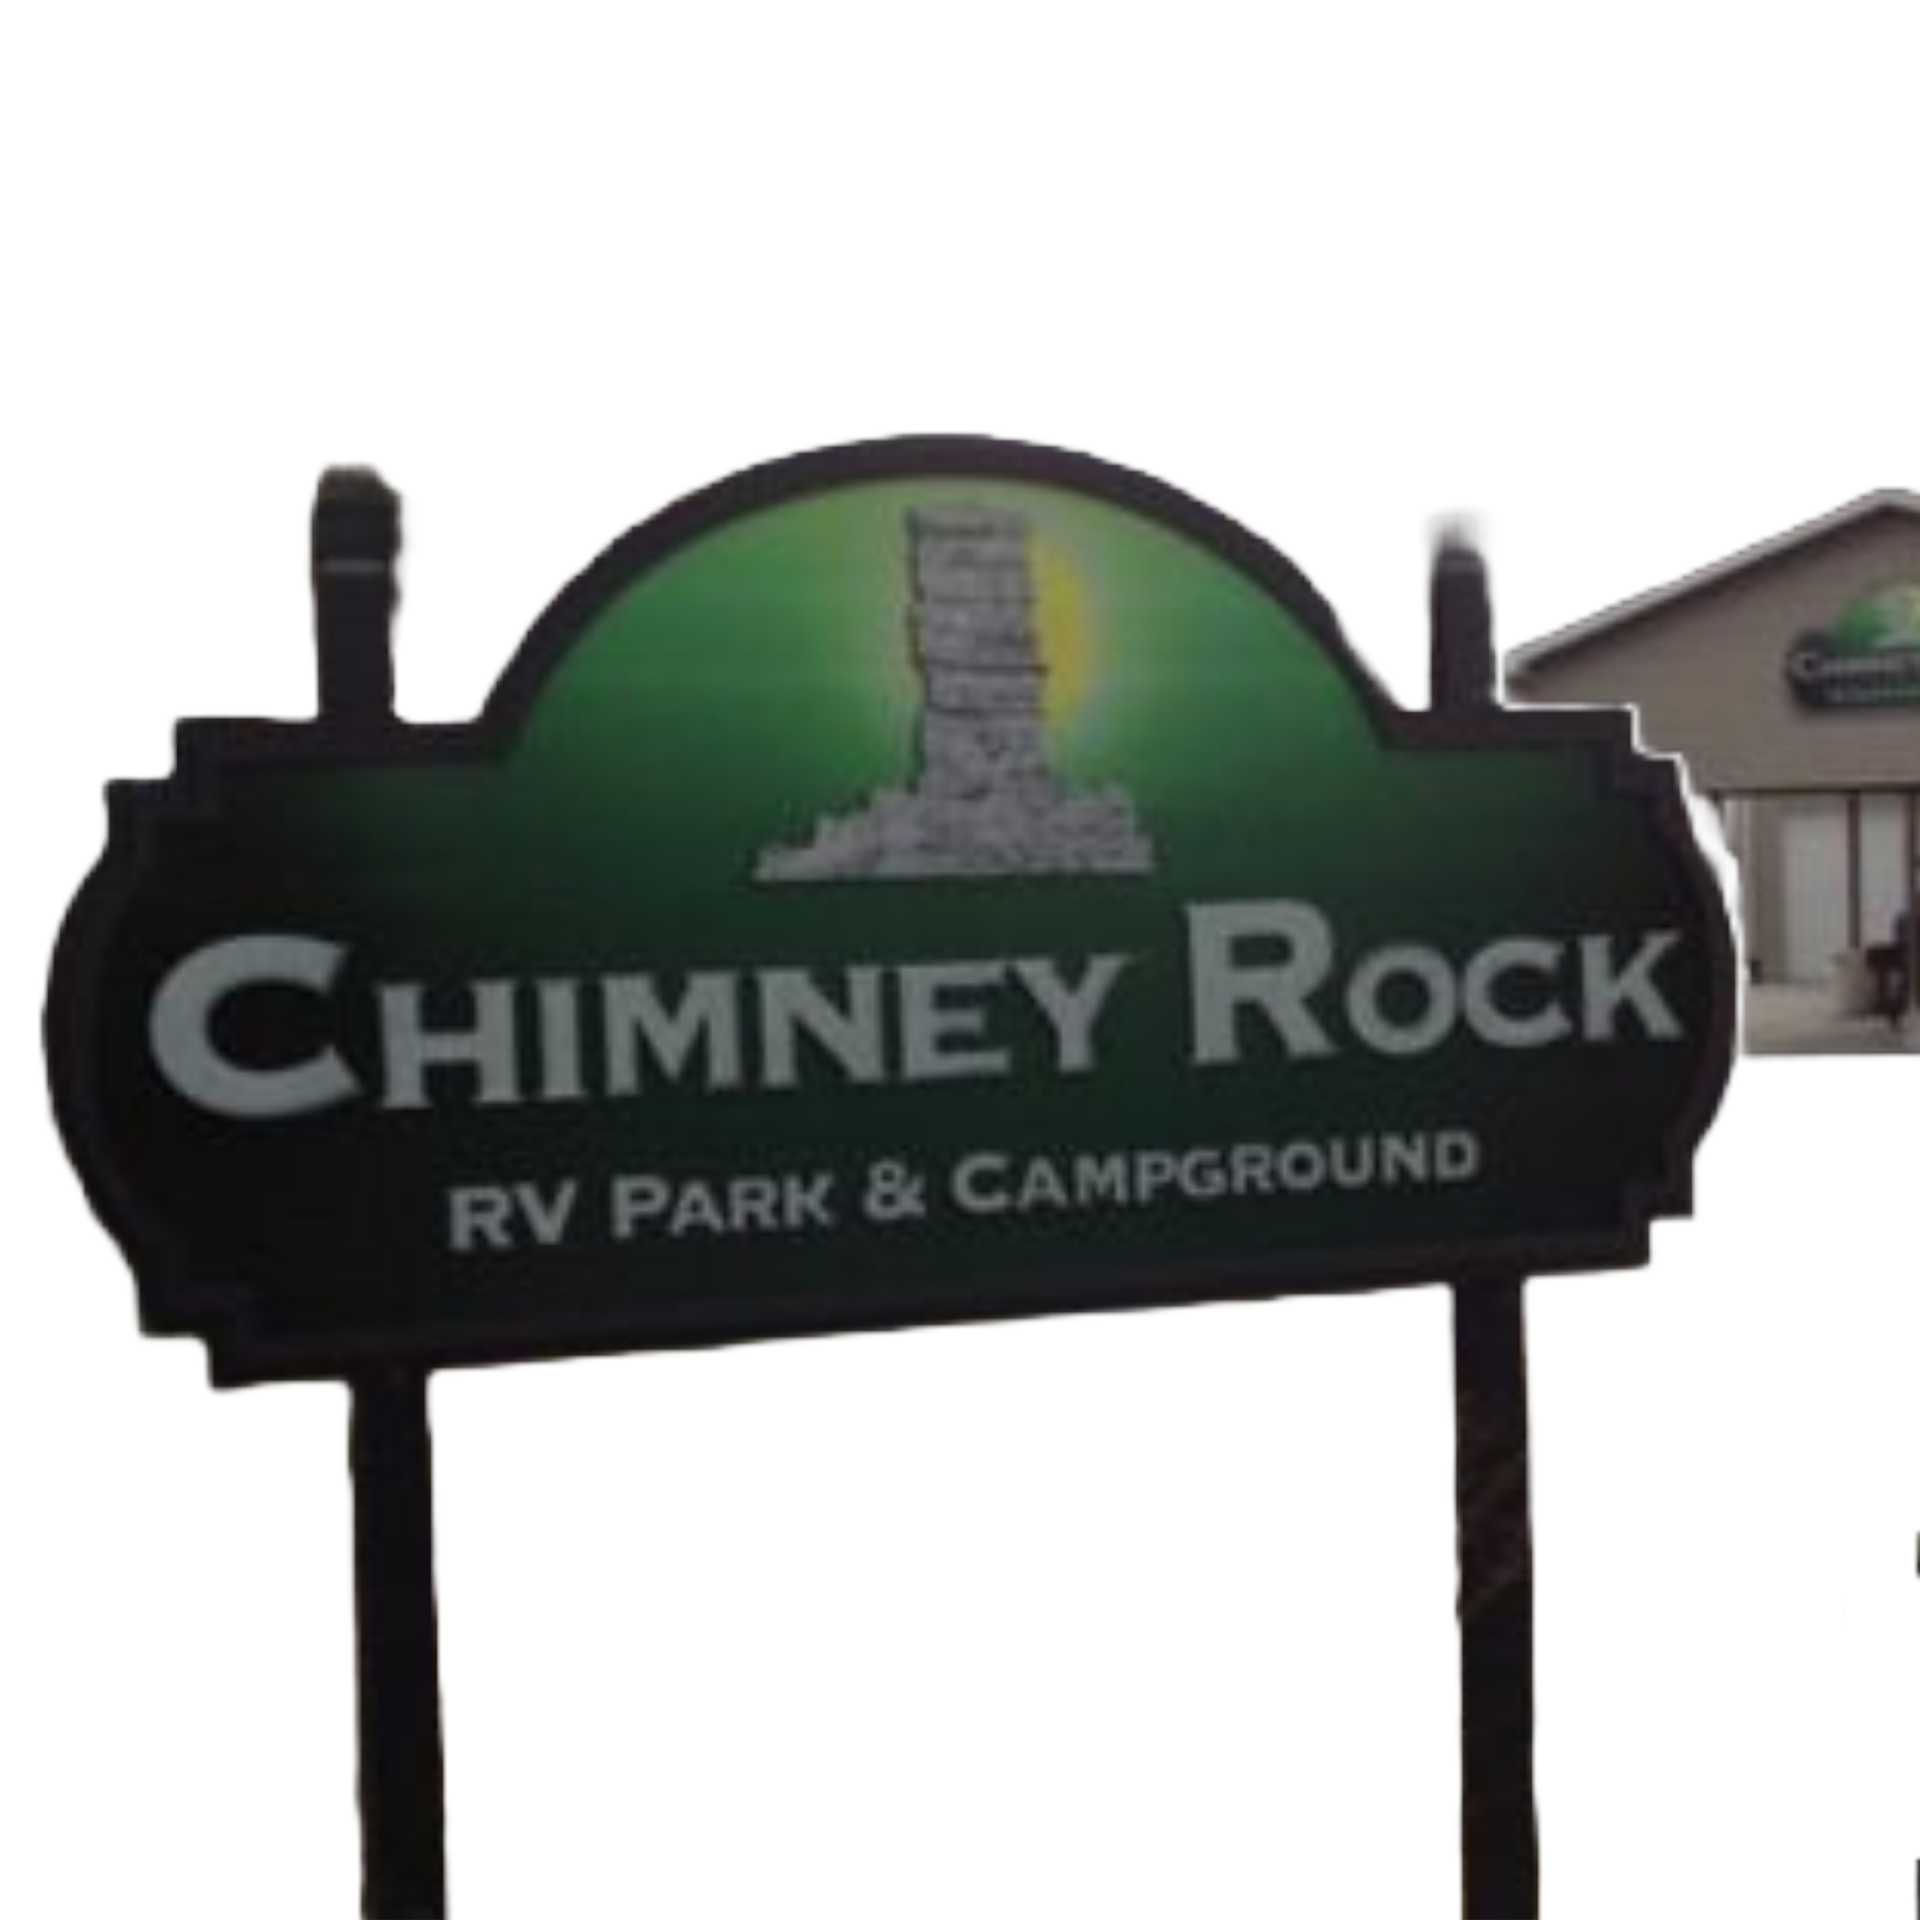 a sign for chimney rock rv park and campground